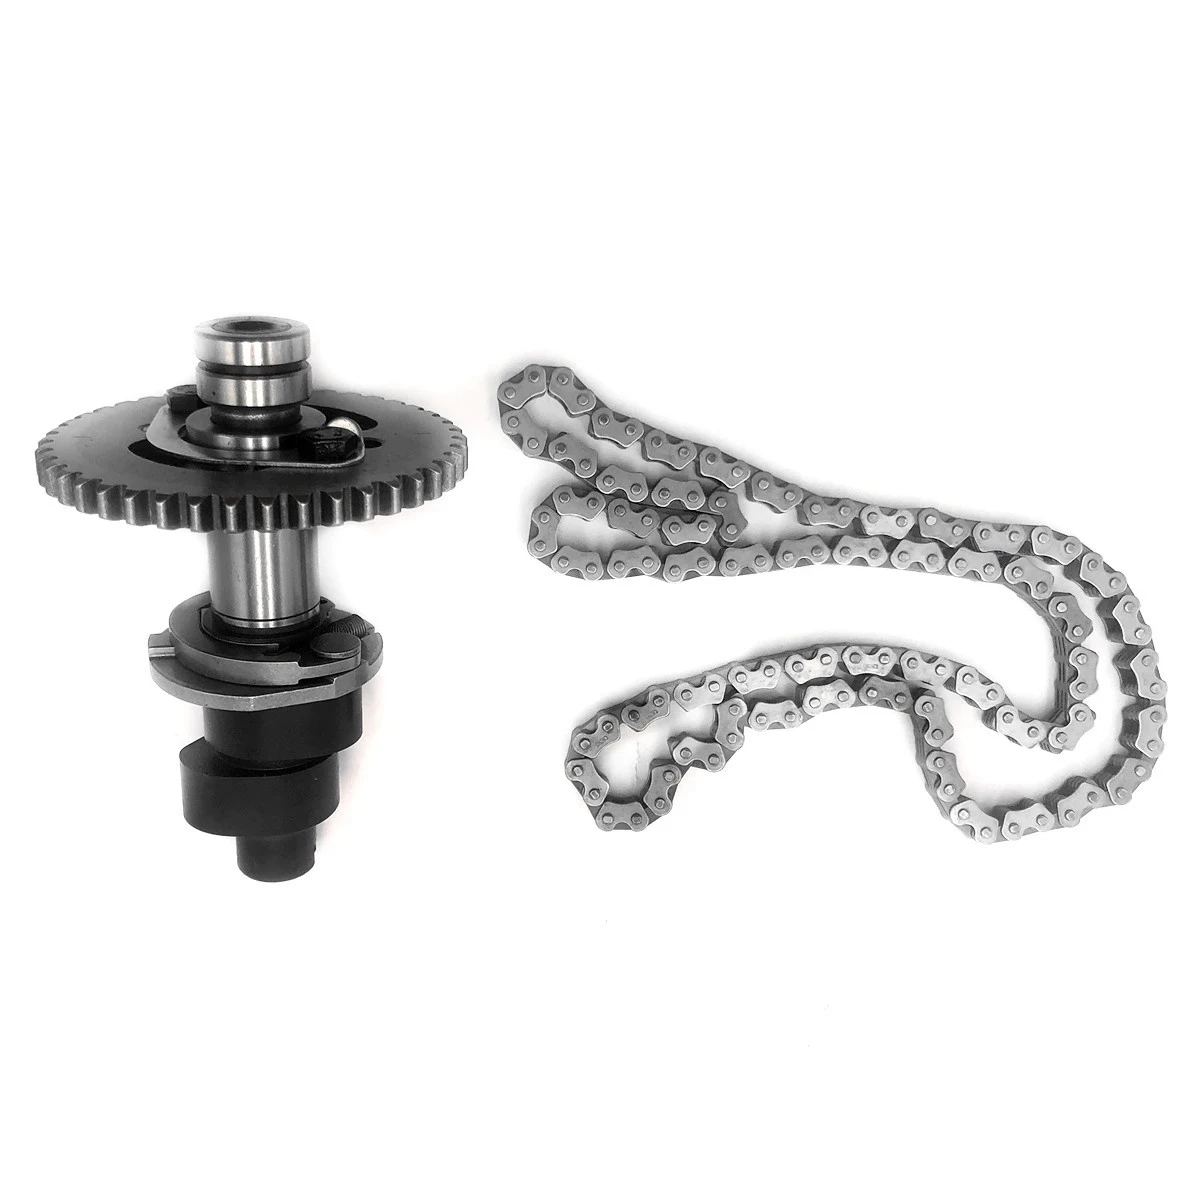 Motorcycle Engine Parts Camshaft with chain for CFMOTO quad CF188 196S CF500 X6 Z6 U6 0180-024000 ATV UTV Parts